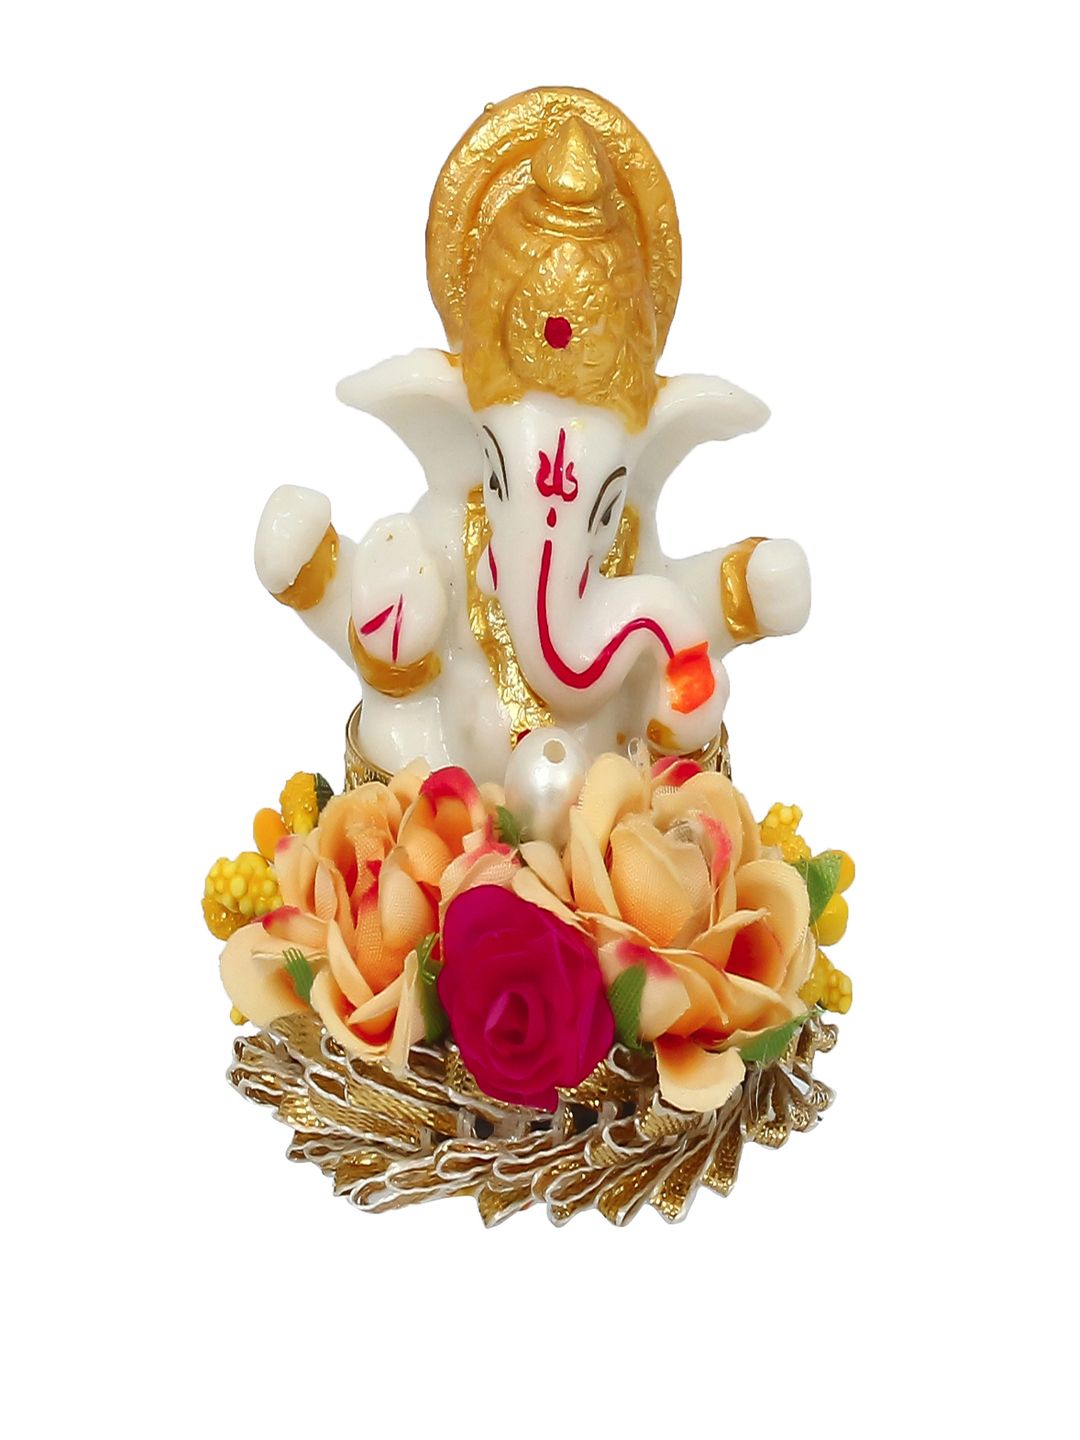 eCraftIndia White & Gold-Toned Handcrafted Lord Ganesha Idol On Decorative Plate Showpiece Price in India